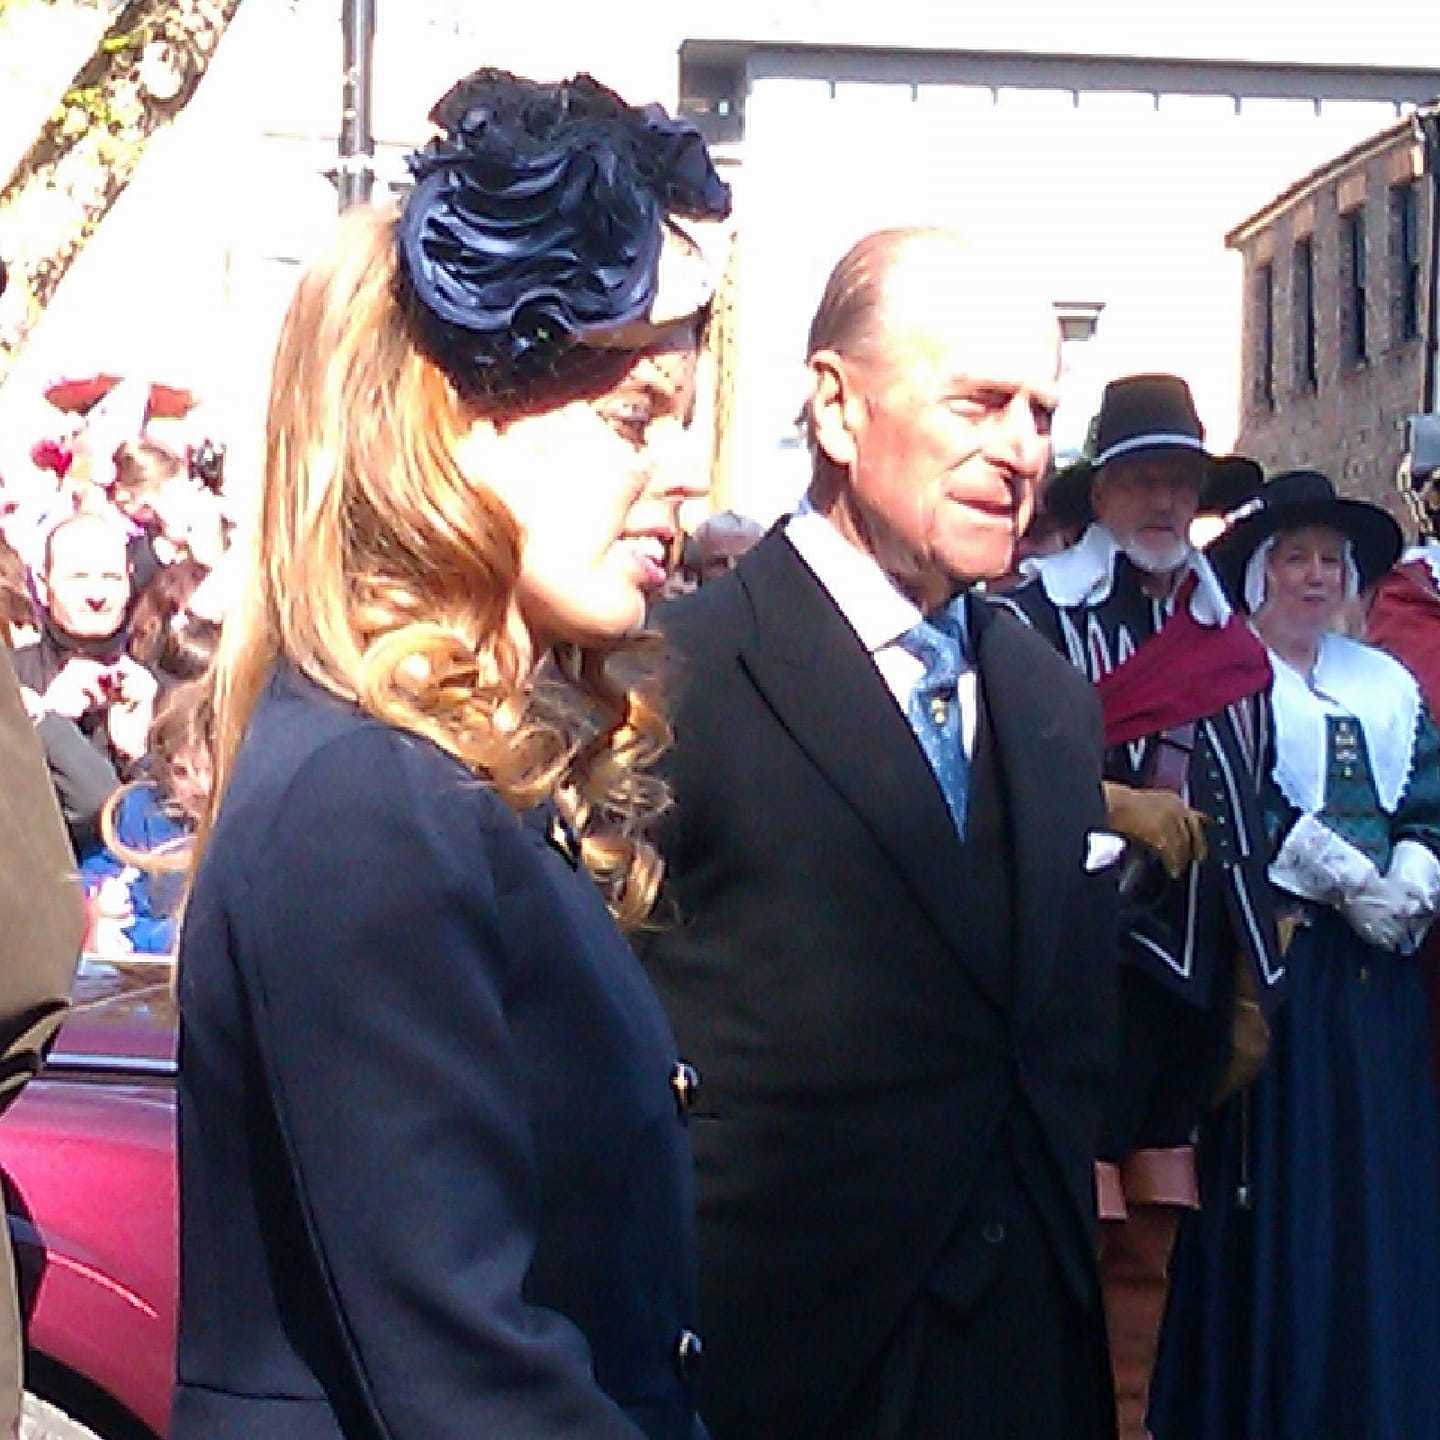 Prince Philip with Princess Beatrice at Micklegate Bar in York in April 2012 - his last visit to the city photo by Maxine Gordon